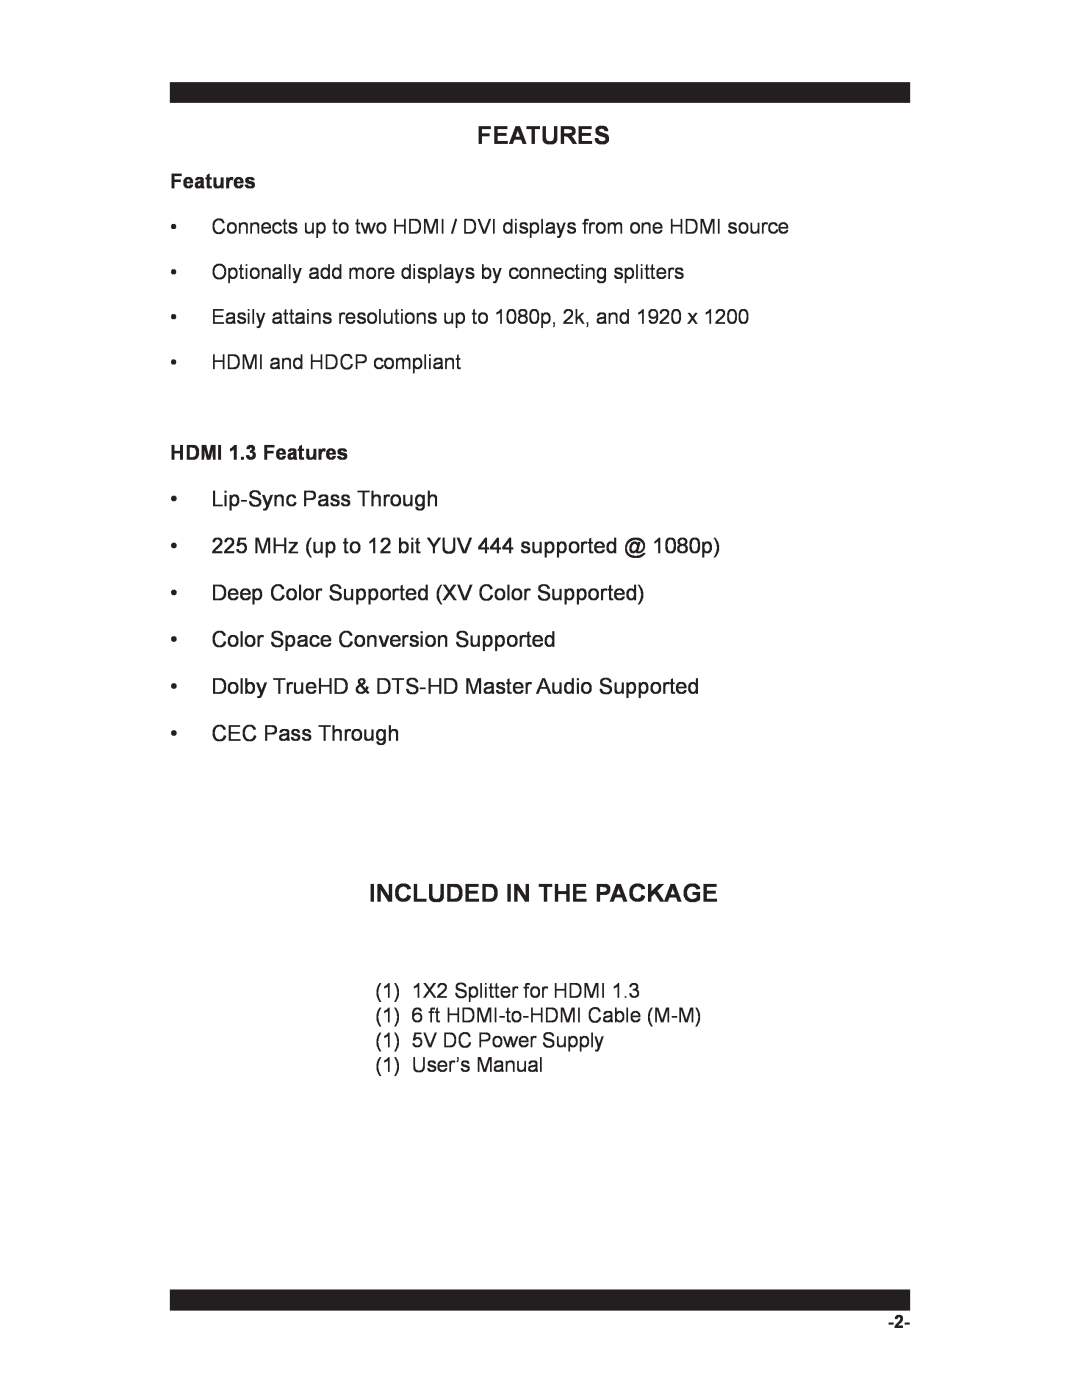 Xantech HDMI1X2 user manual Features, Included In The Package 